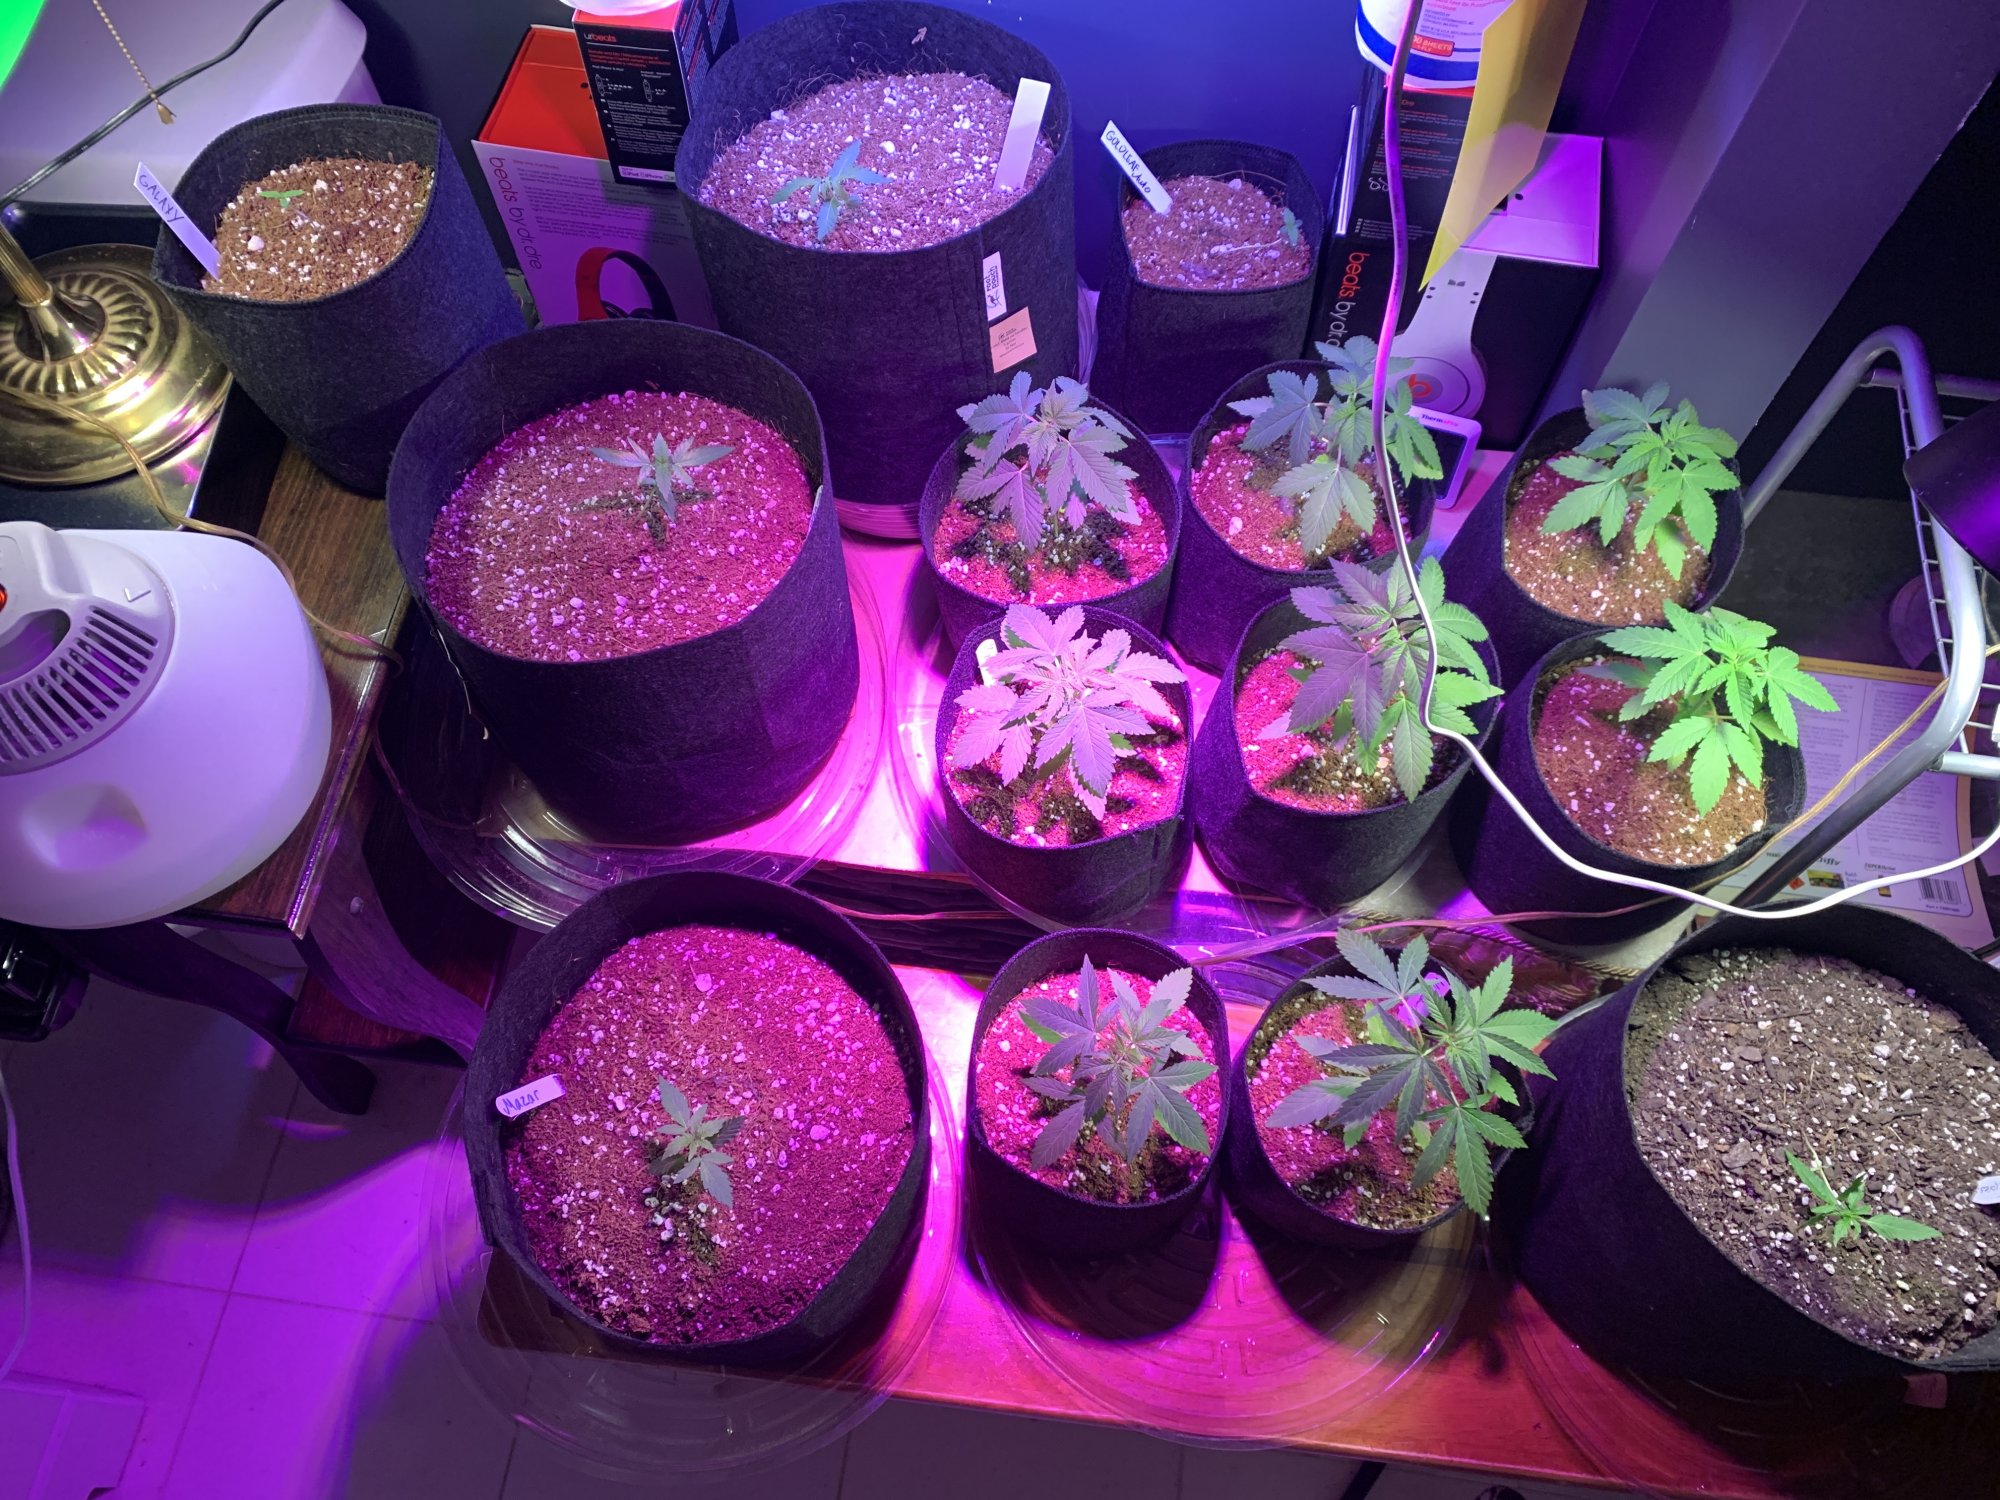 First time grow starting indoors moving outdoor